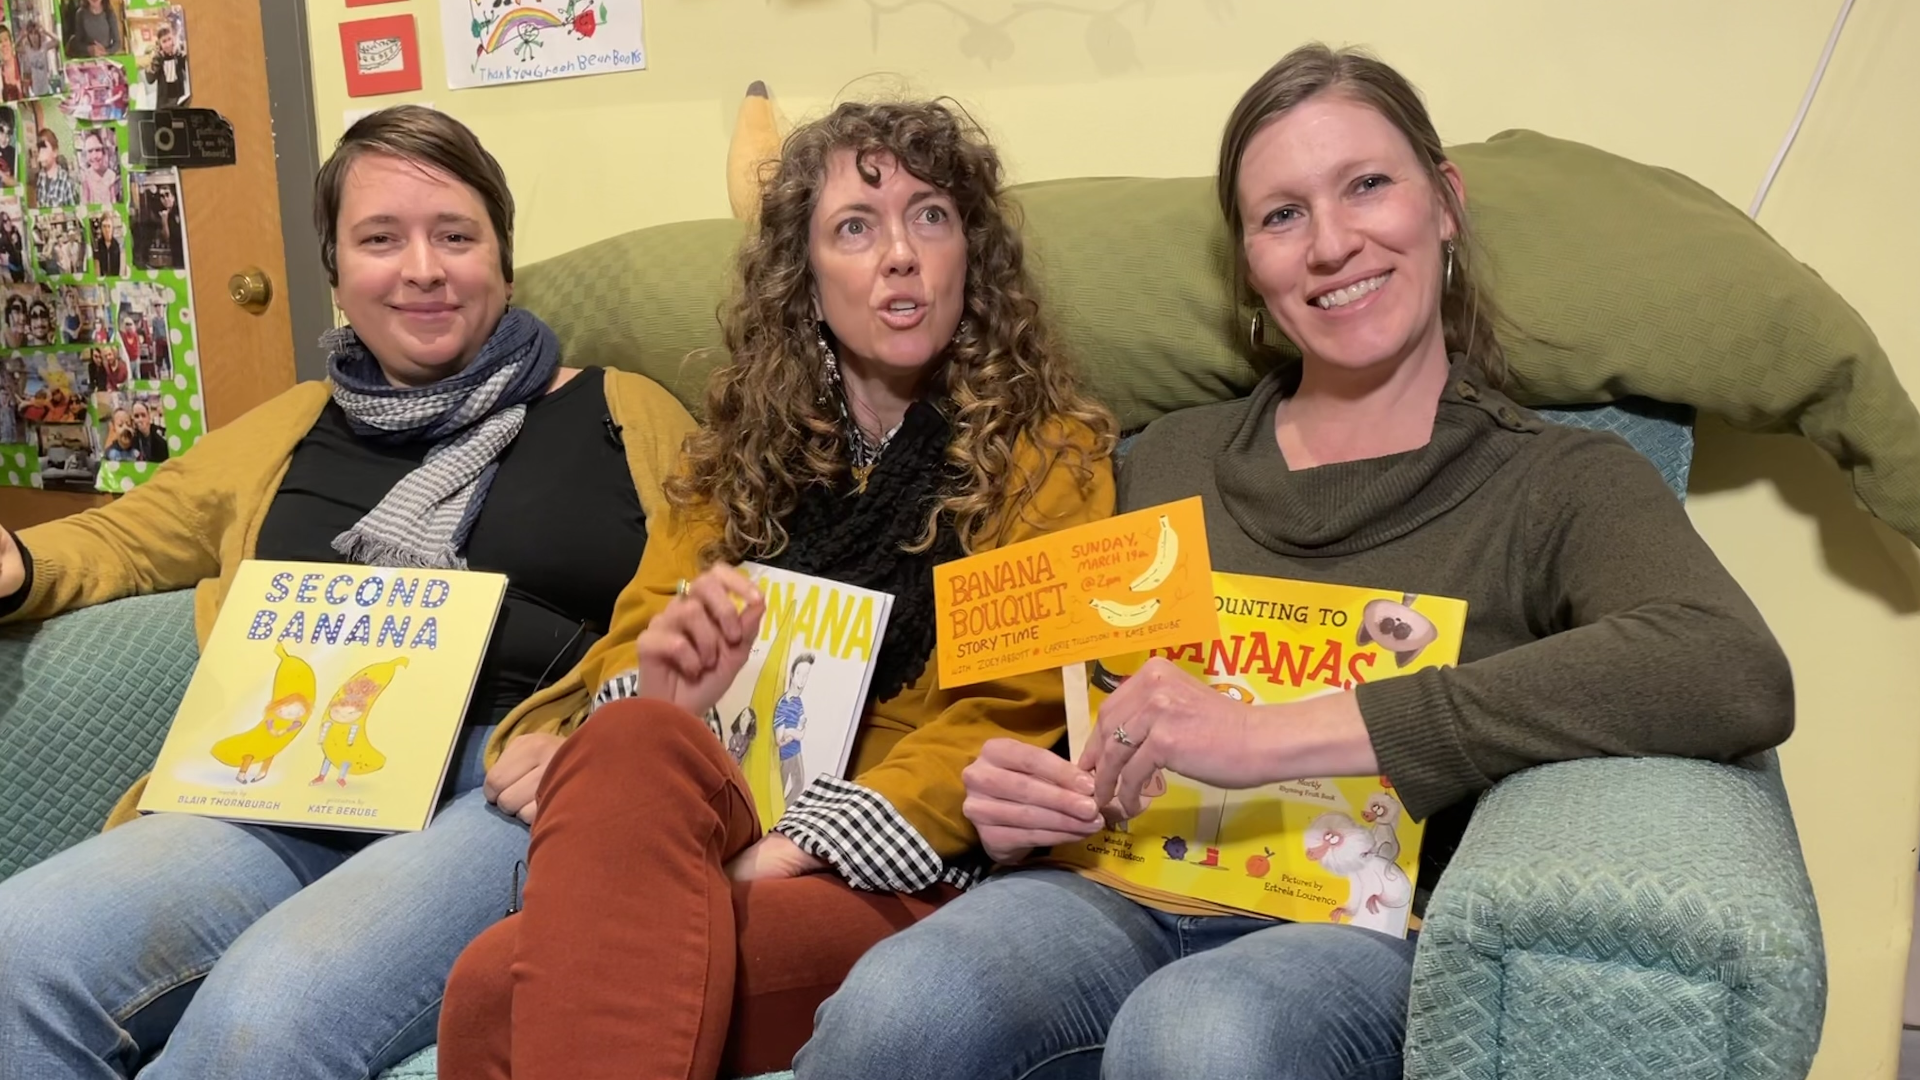 Three authors from the Portland metro area each wrote or illustrated a book with a banana theme and are supporting each other's efforts.